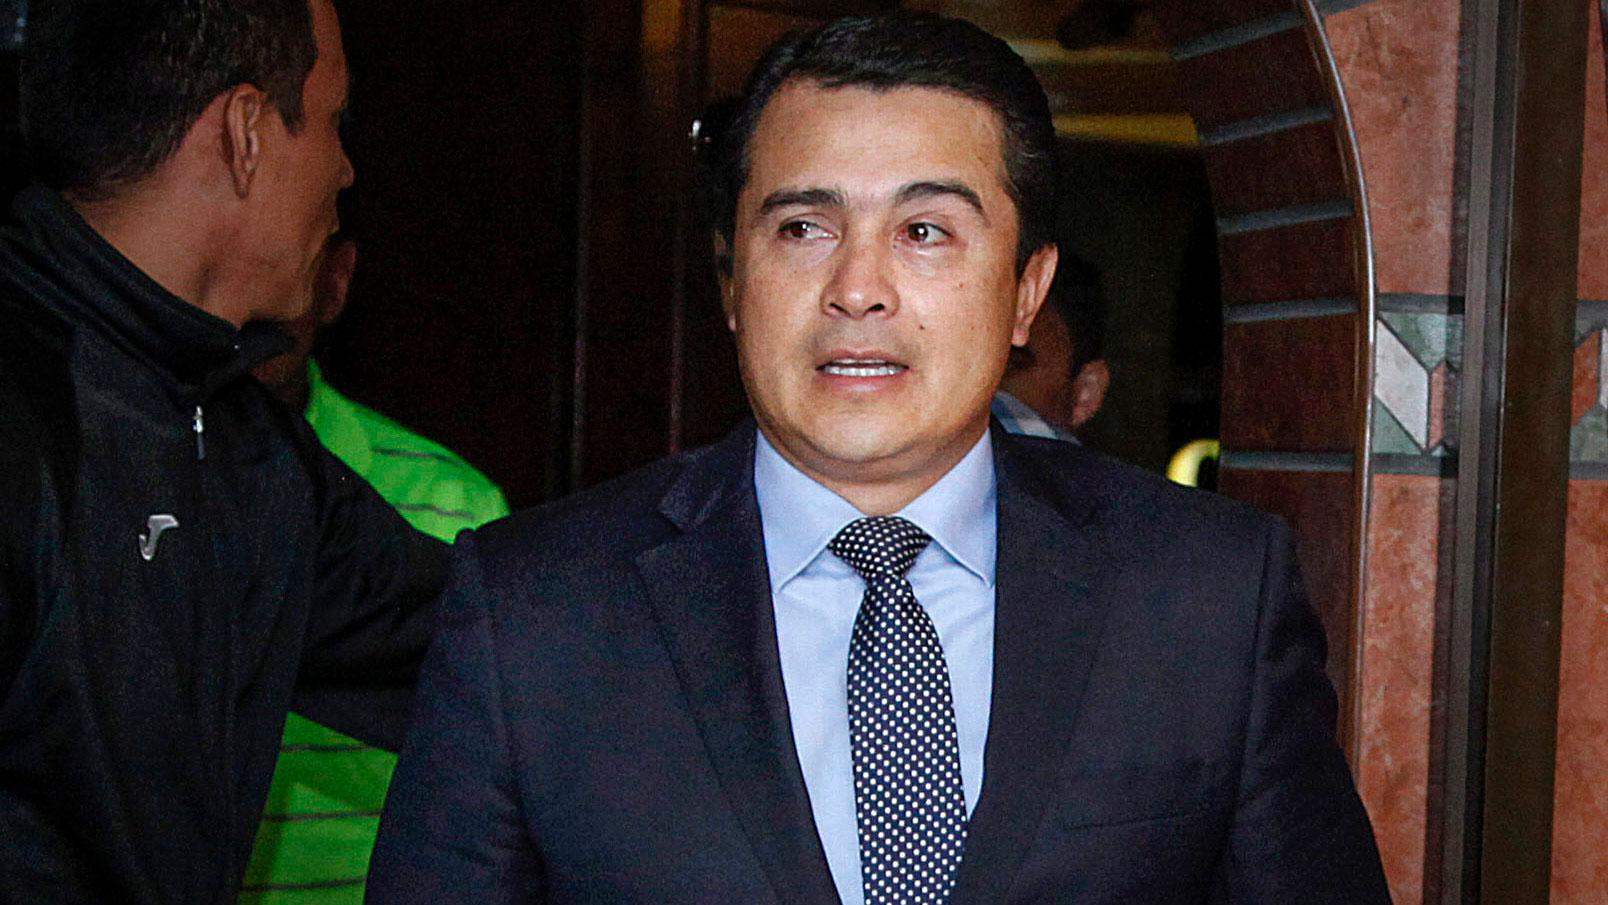 Juan Antonio "Tony" Hernández is shown wearing a blue suit and spotted tie.